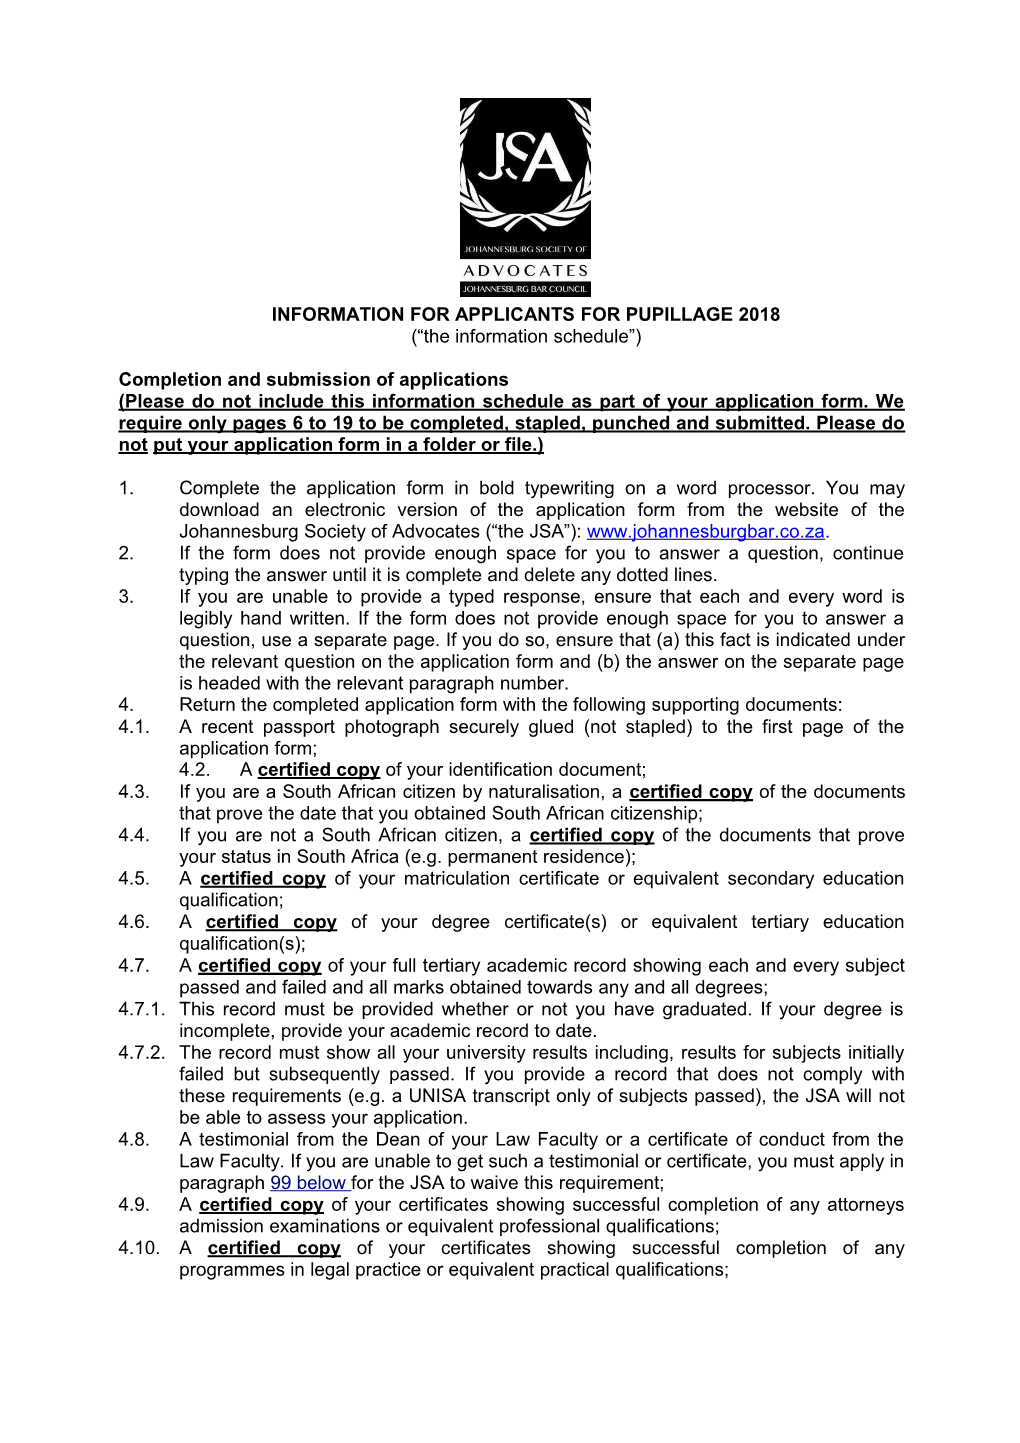 Application for Pupillage at JHB Bar 2014